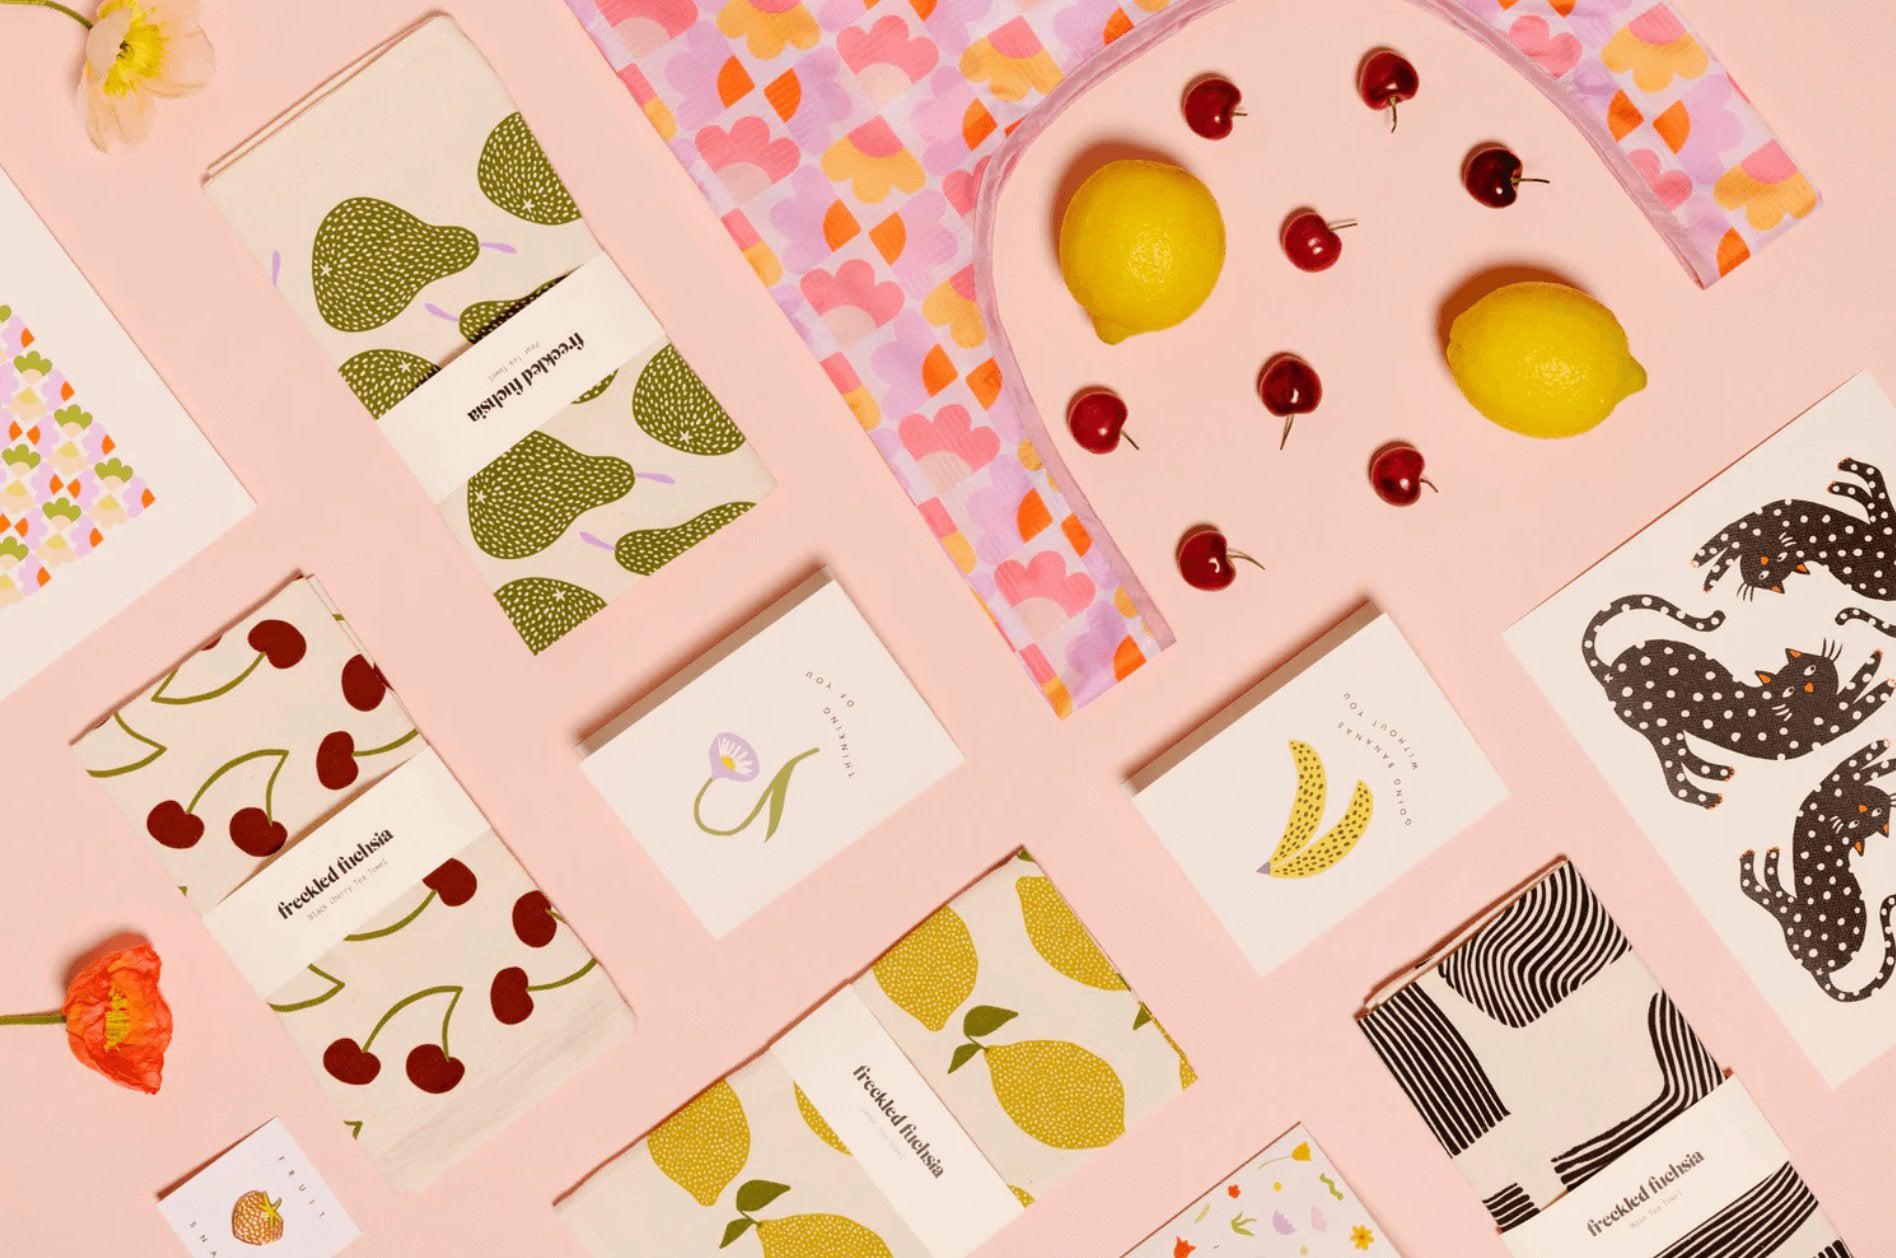 Freckled Fuchsia's screenprinted tea towels with lemons, pears, black cats and more